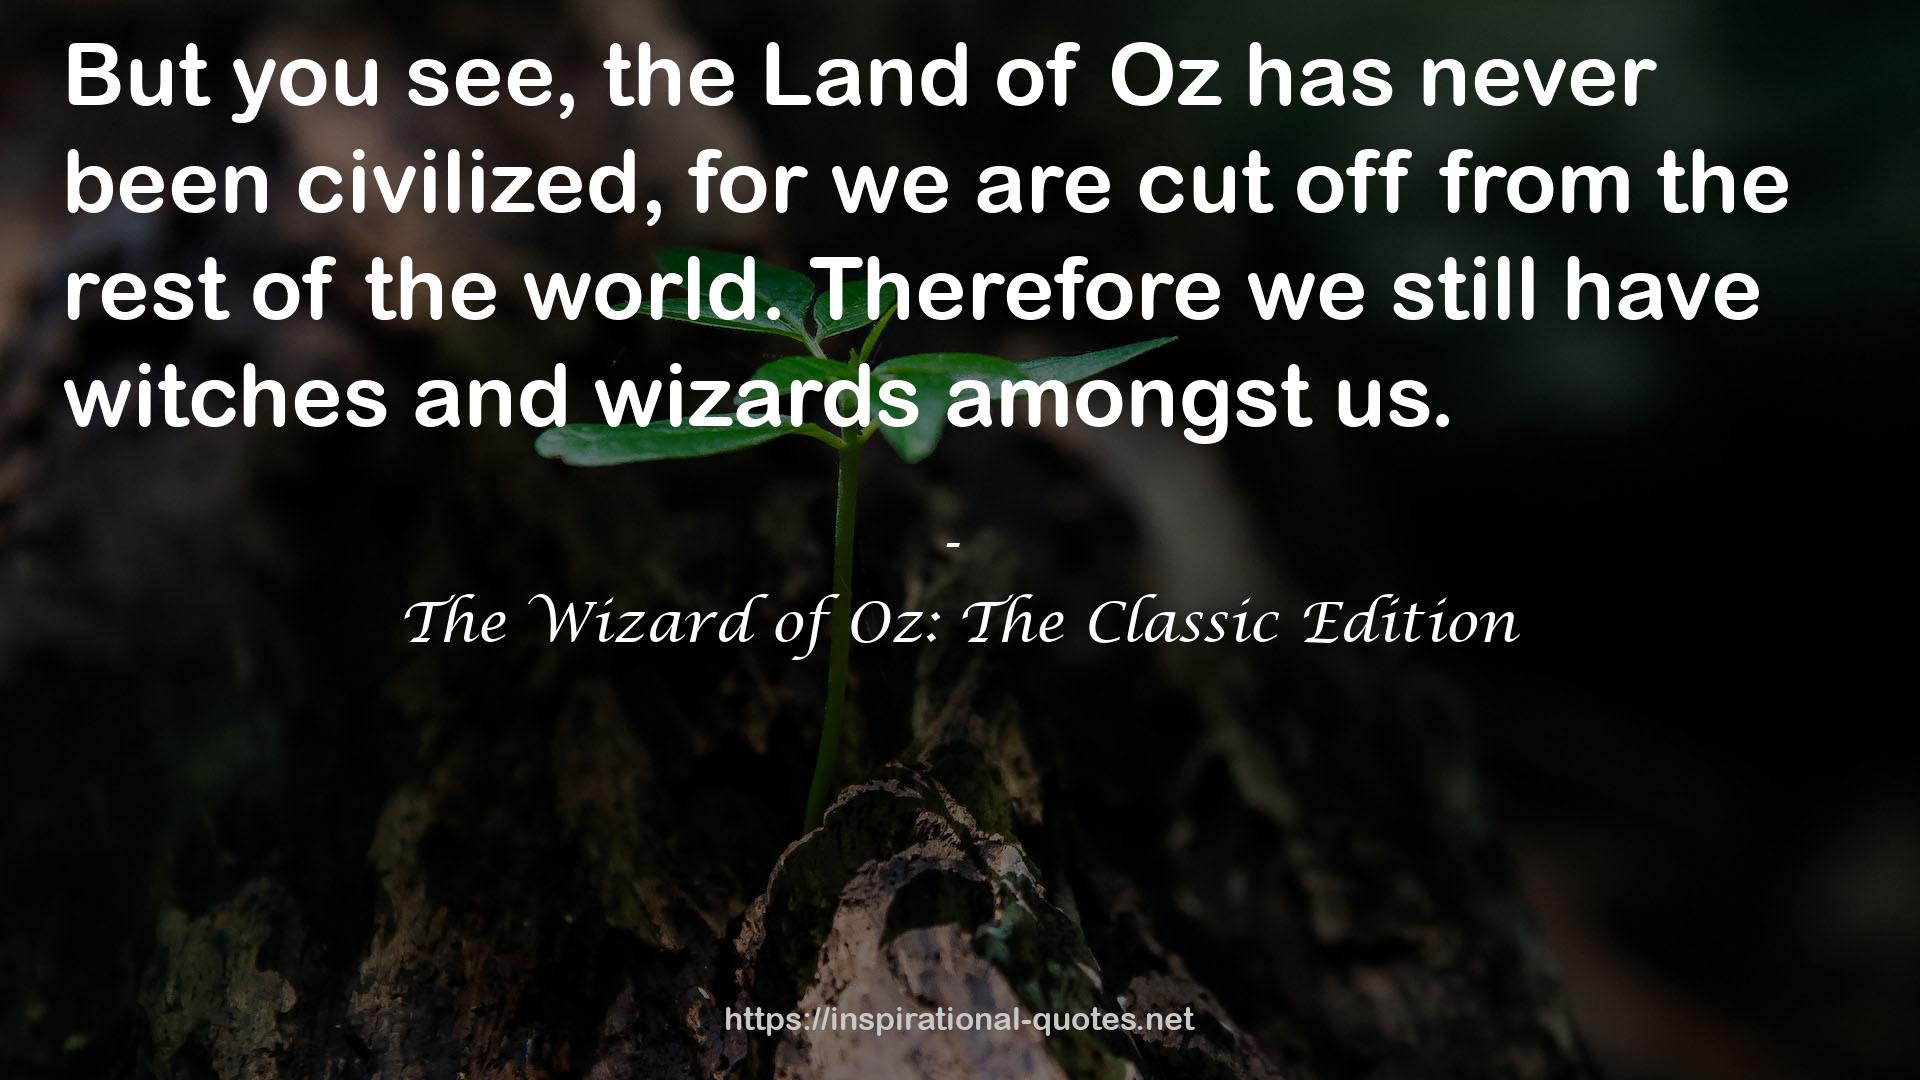 The Wizard of Oz: The Classic Edition QUOTES